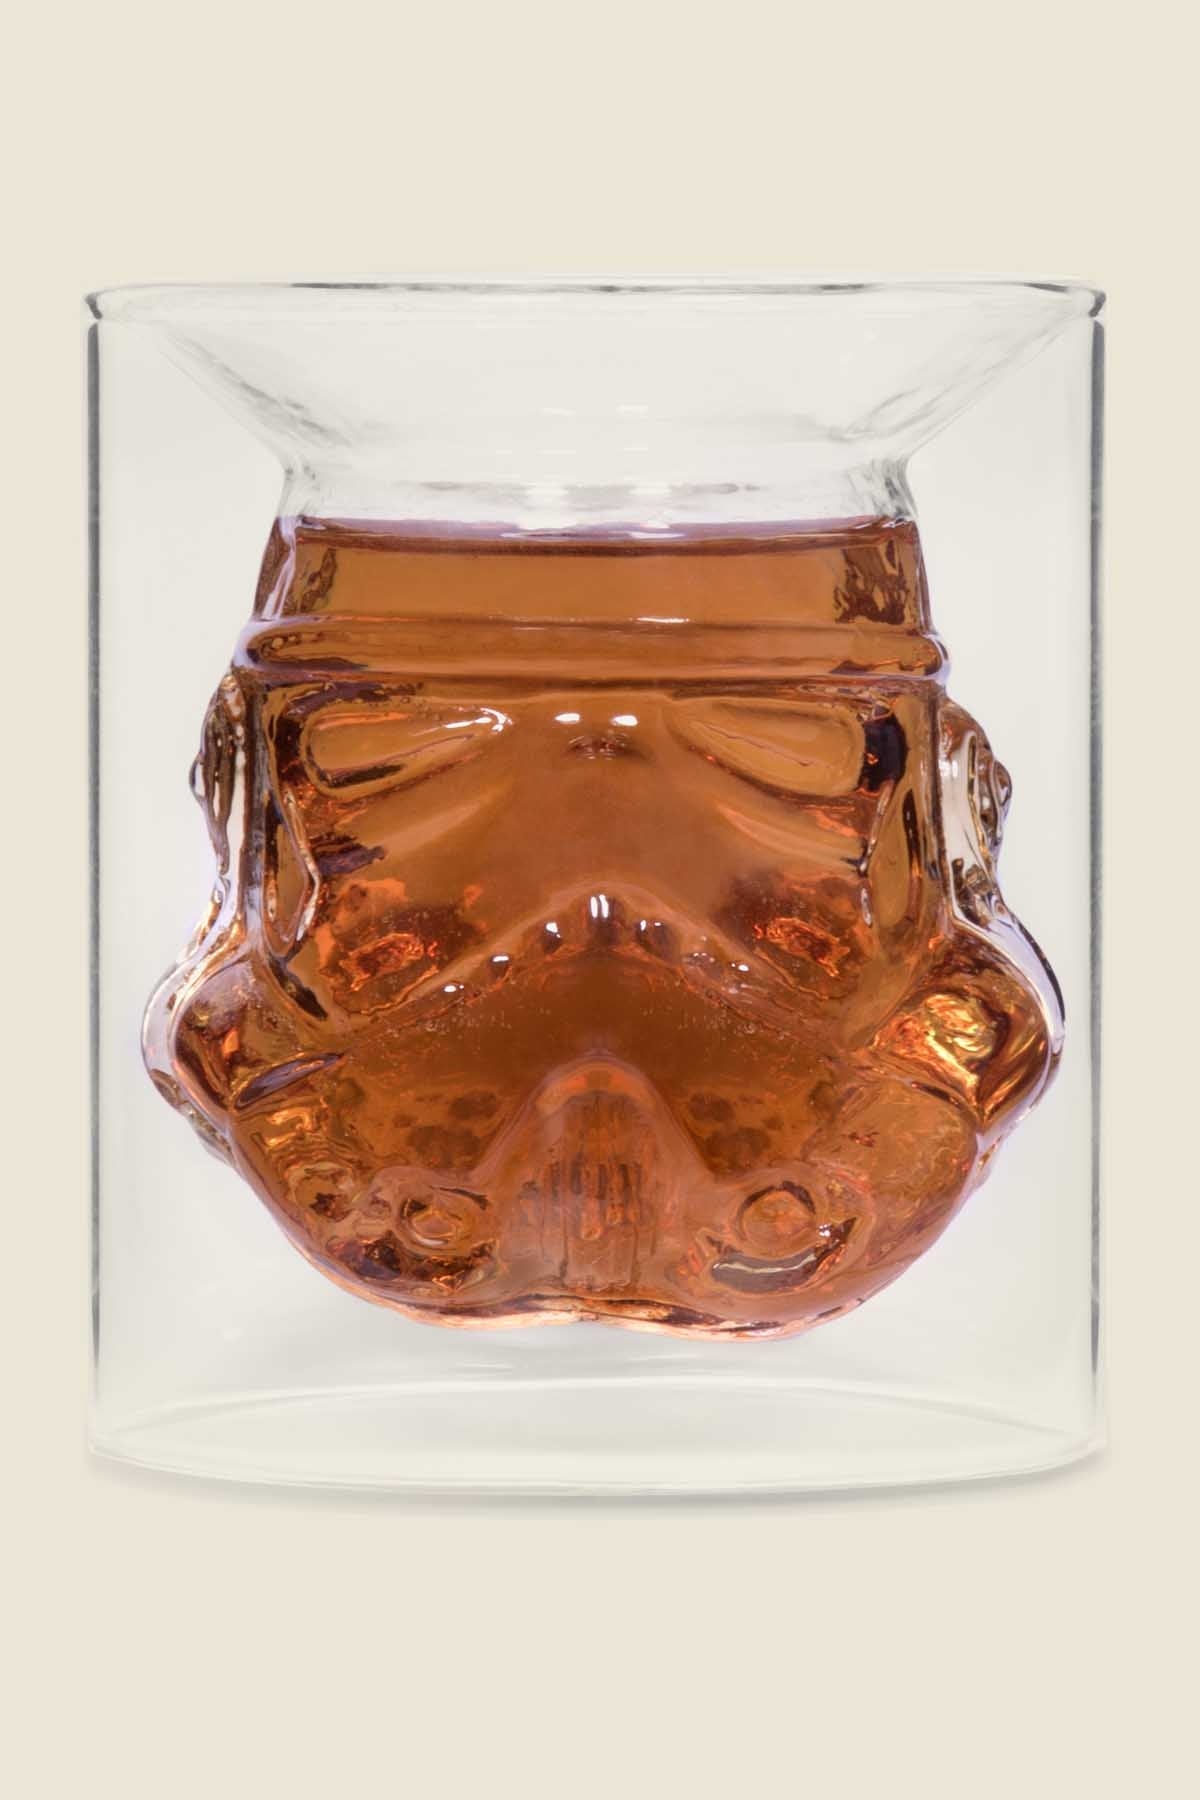 Storm Trooper Whiskey Decanter